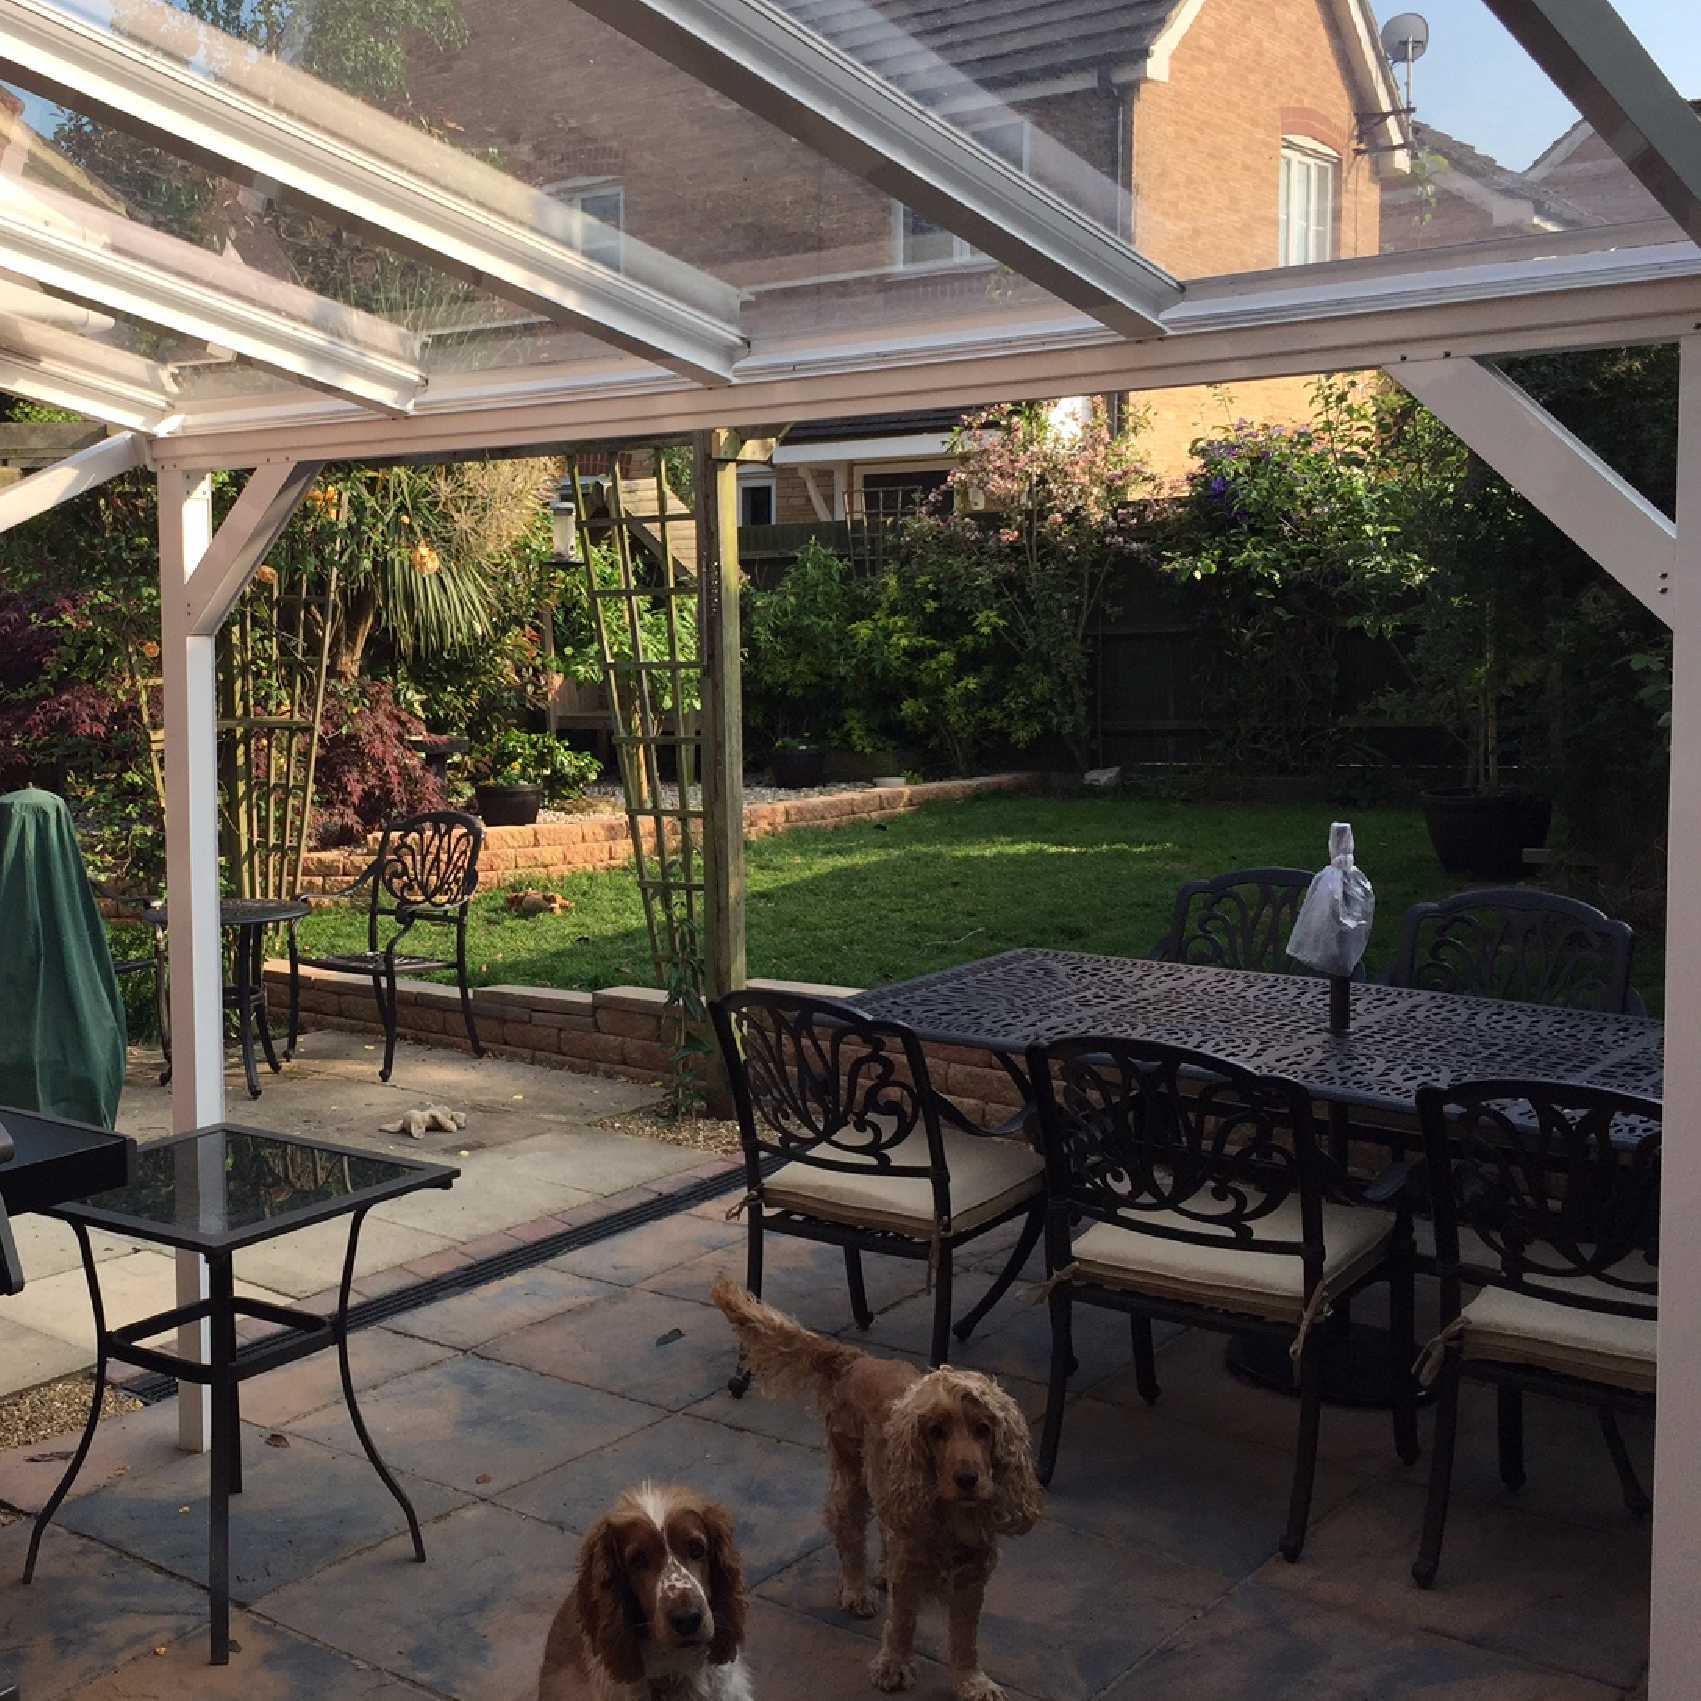 Affordable Omega Smart Lean-To Canopy, White UNGLAZED for 6mm Glazing - 3.5m (W) x 2.5m (P), (3) Supporting Posts